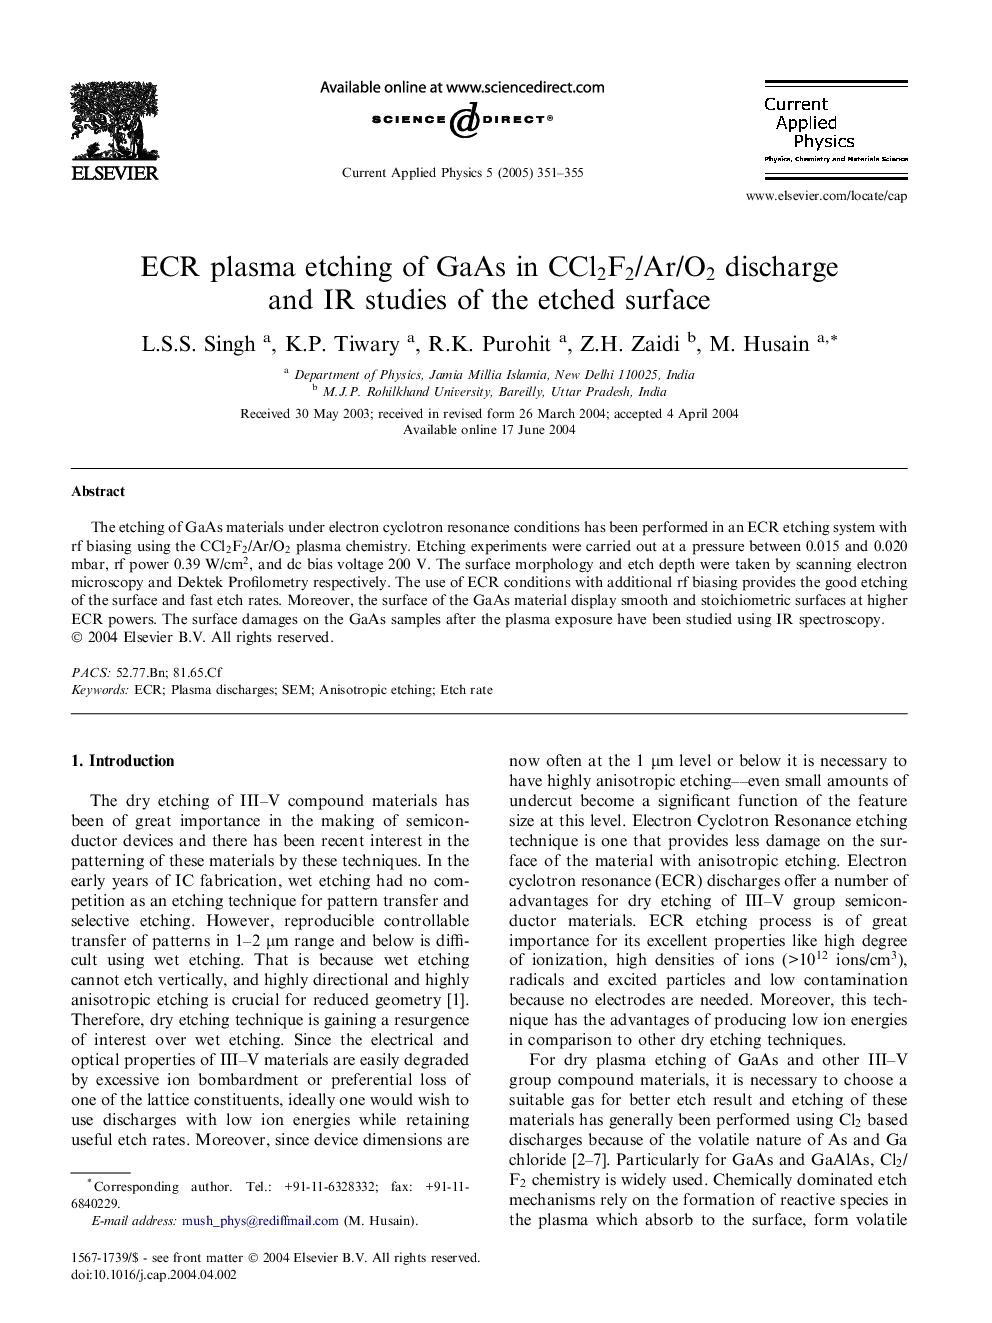 ECR plasma etching of GaAs in CCl2F2/Ar/O2 discharge and IR studies of the etched surface